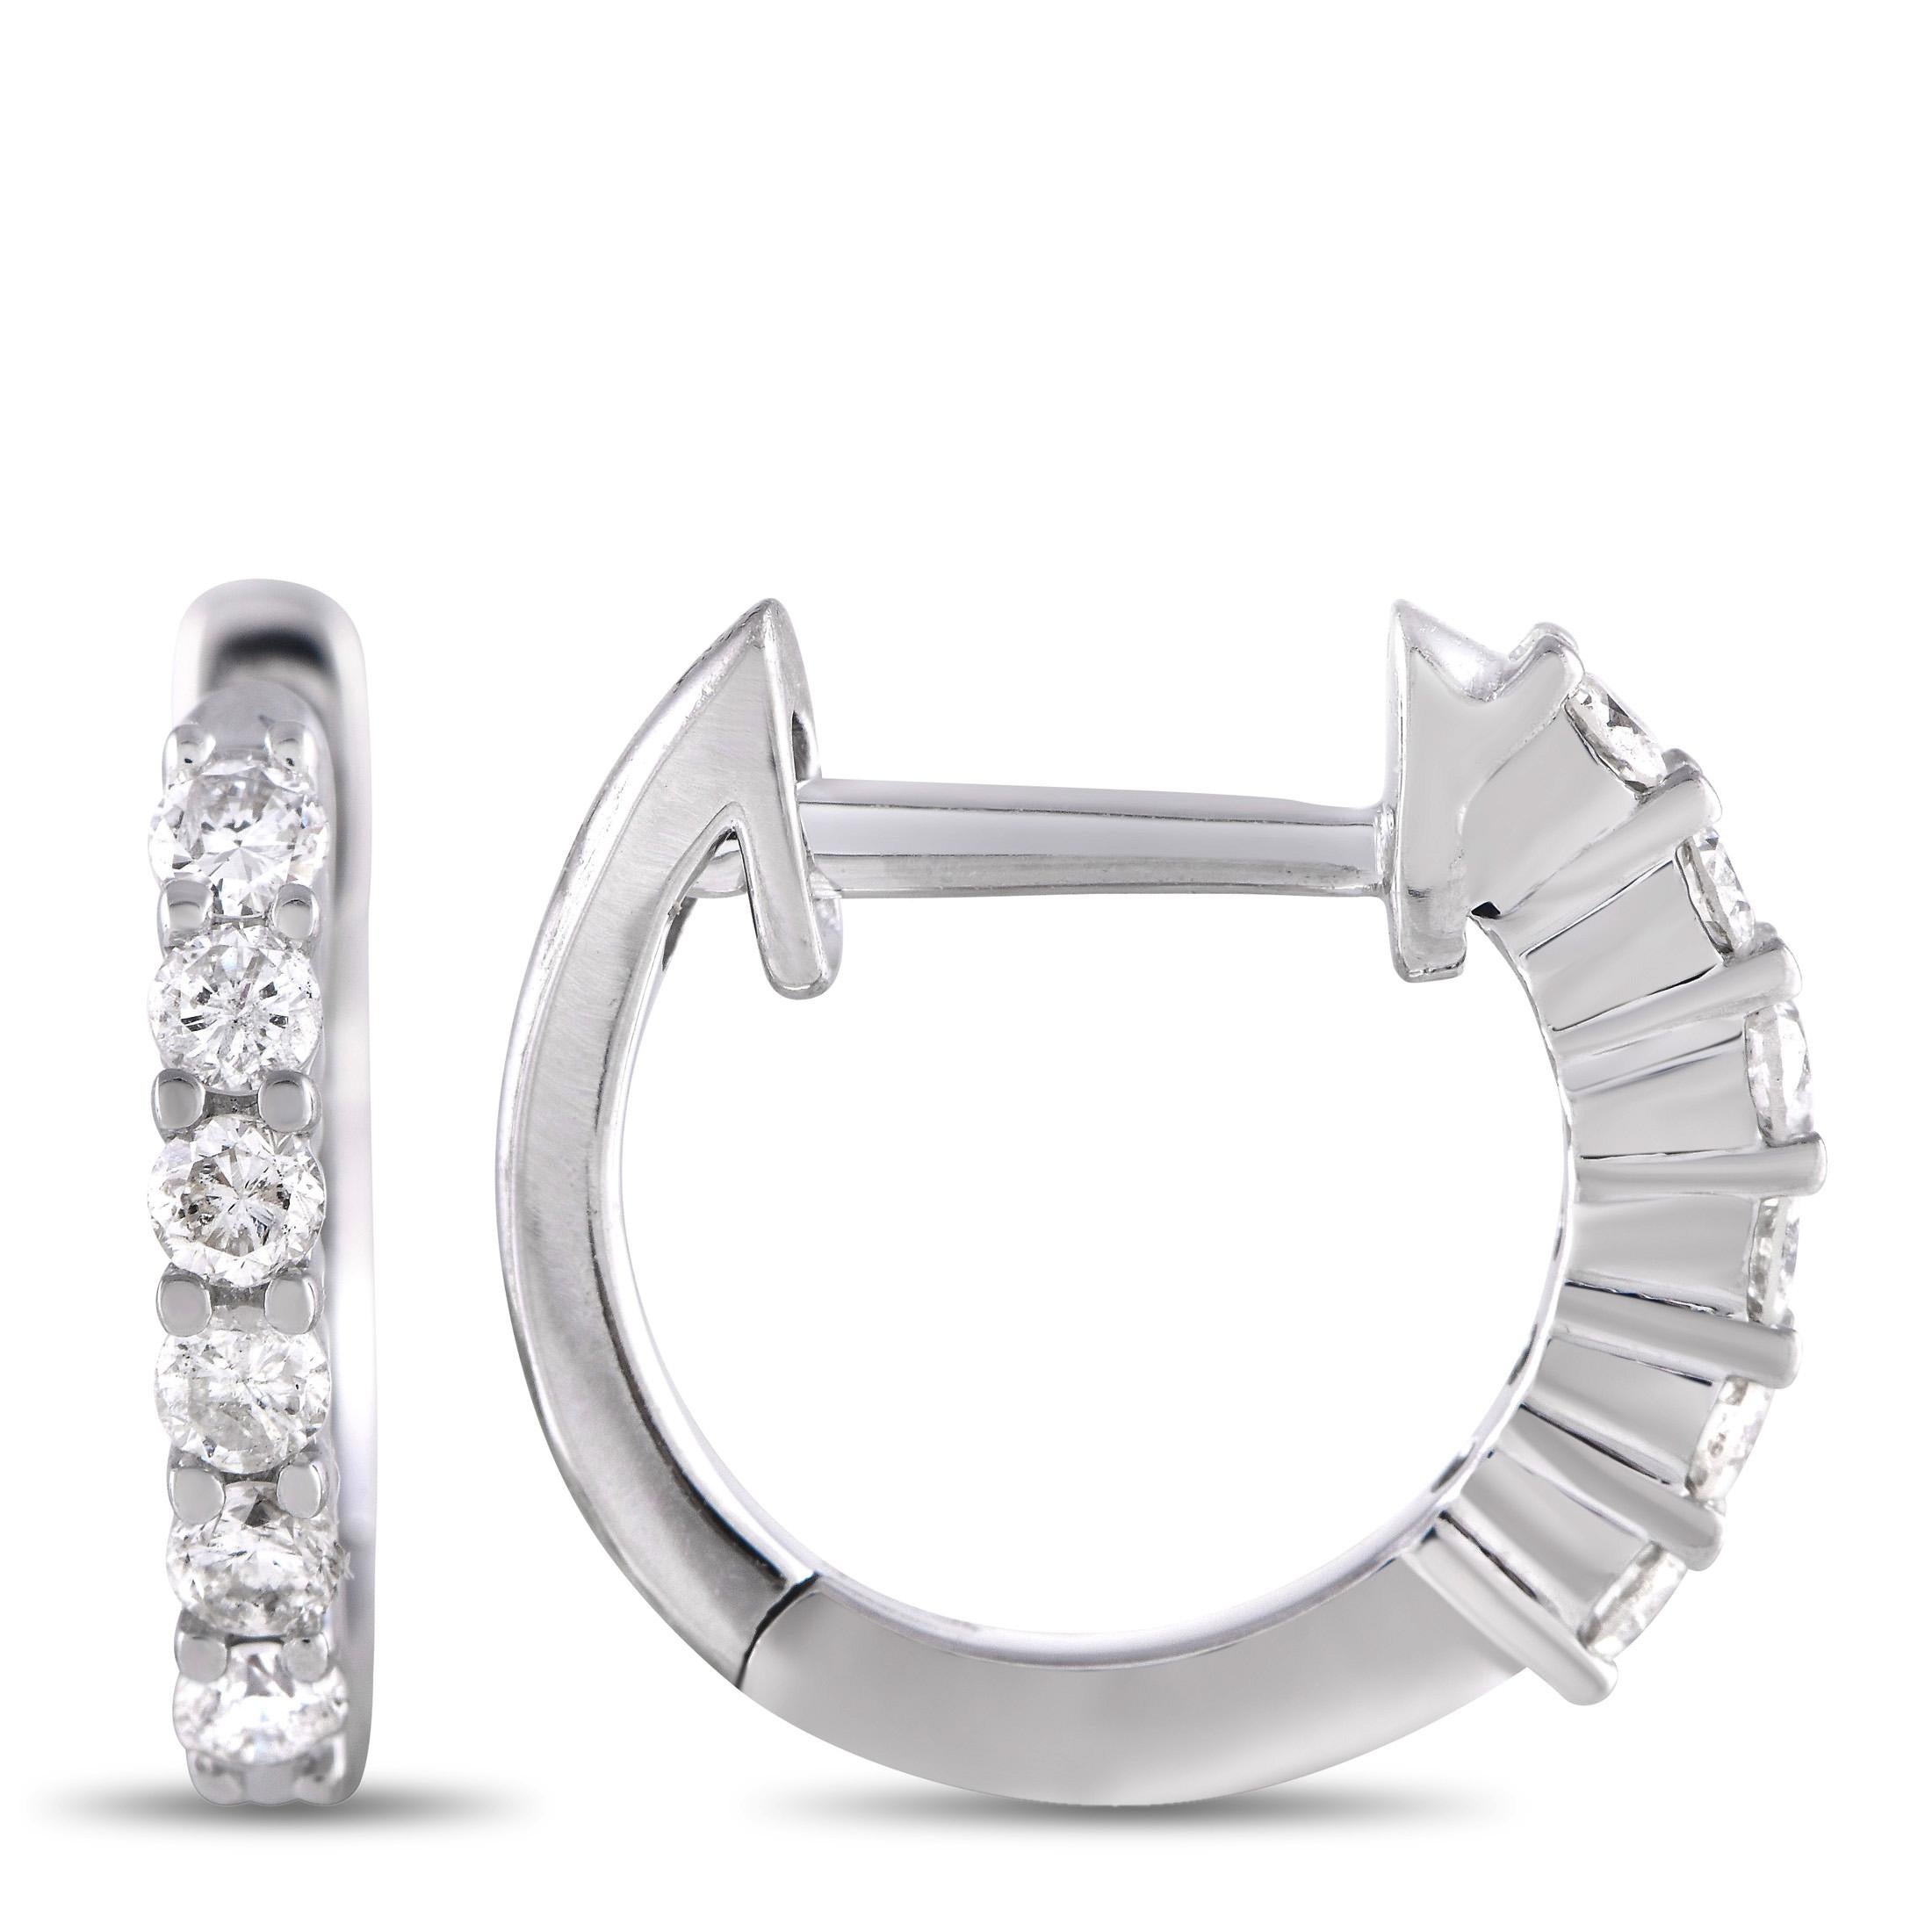 Round-cut diamonds totaling 0.25 carats add the perfect amount of sparkle to these delicate hoop earrings. A shimmering 14K White Gold setting measuring 0.5” round beautifully complements the glittering gemstones, which make a statement at the